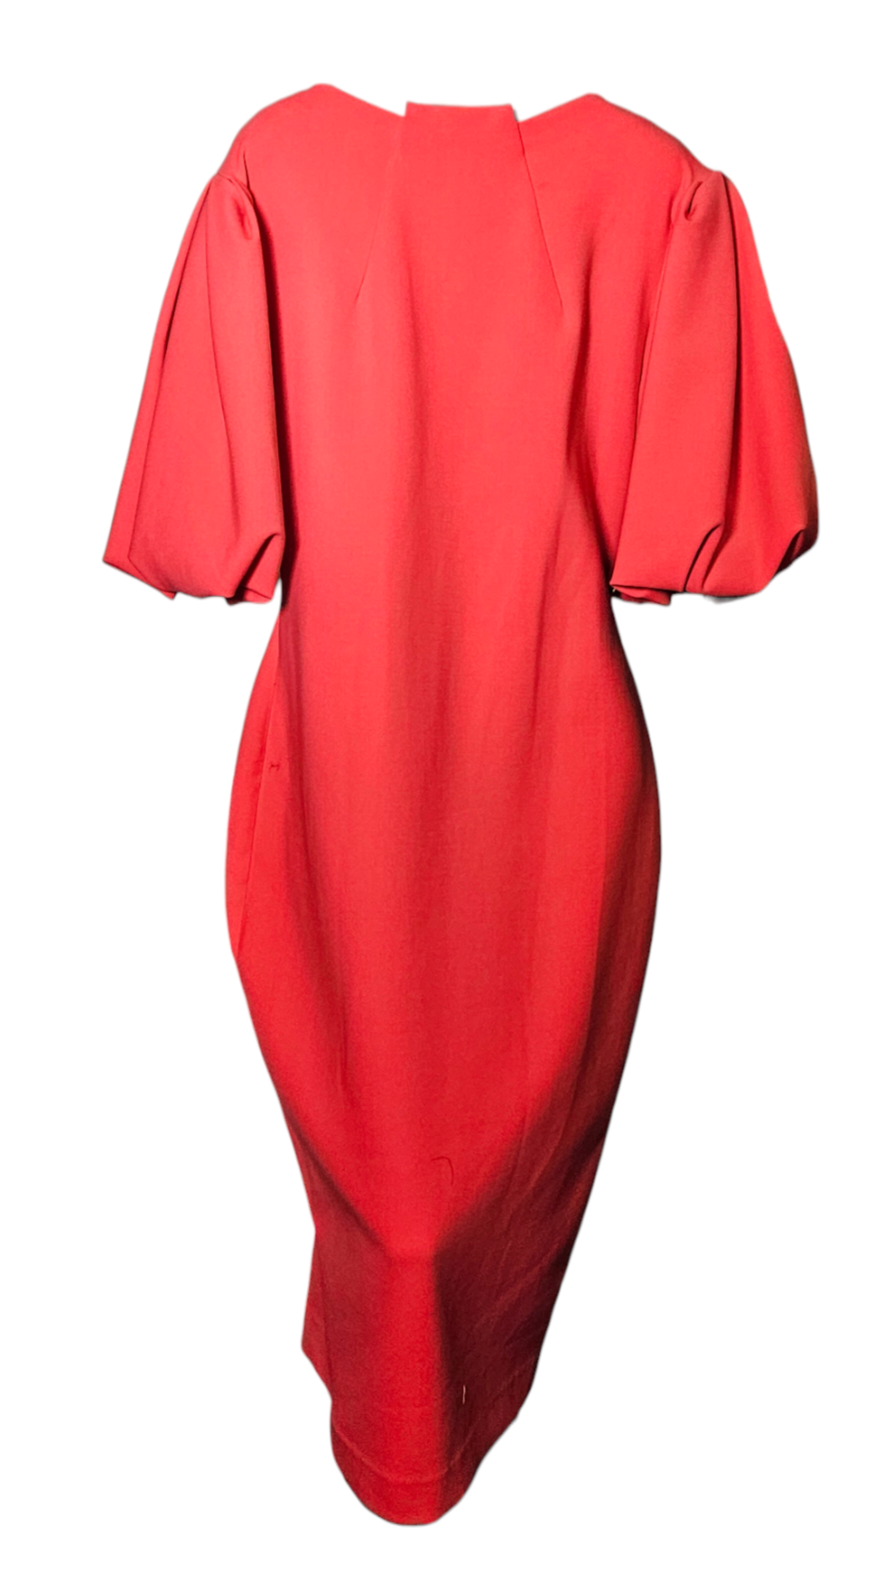 Center High-Neck Dress with Puffed Sleeves